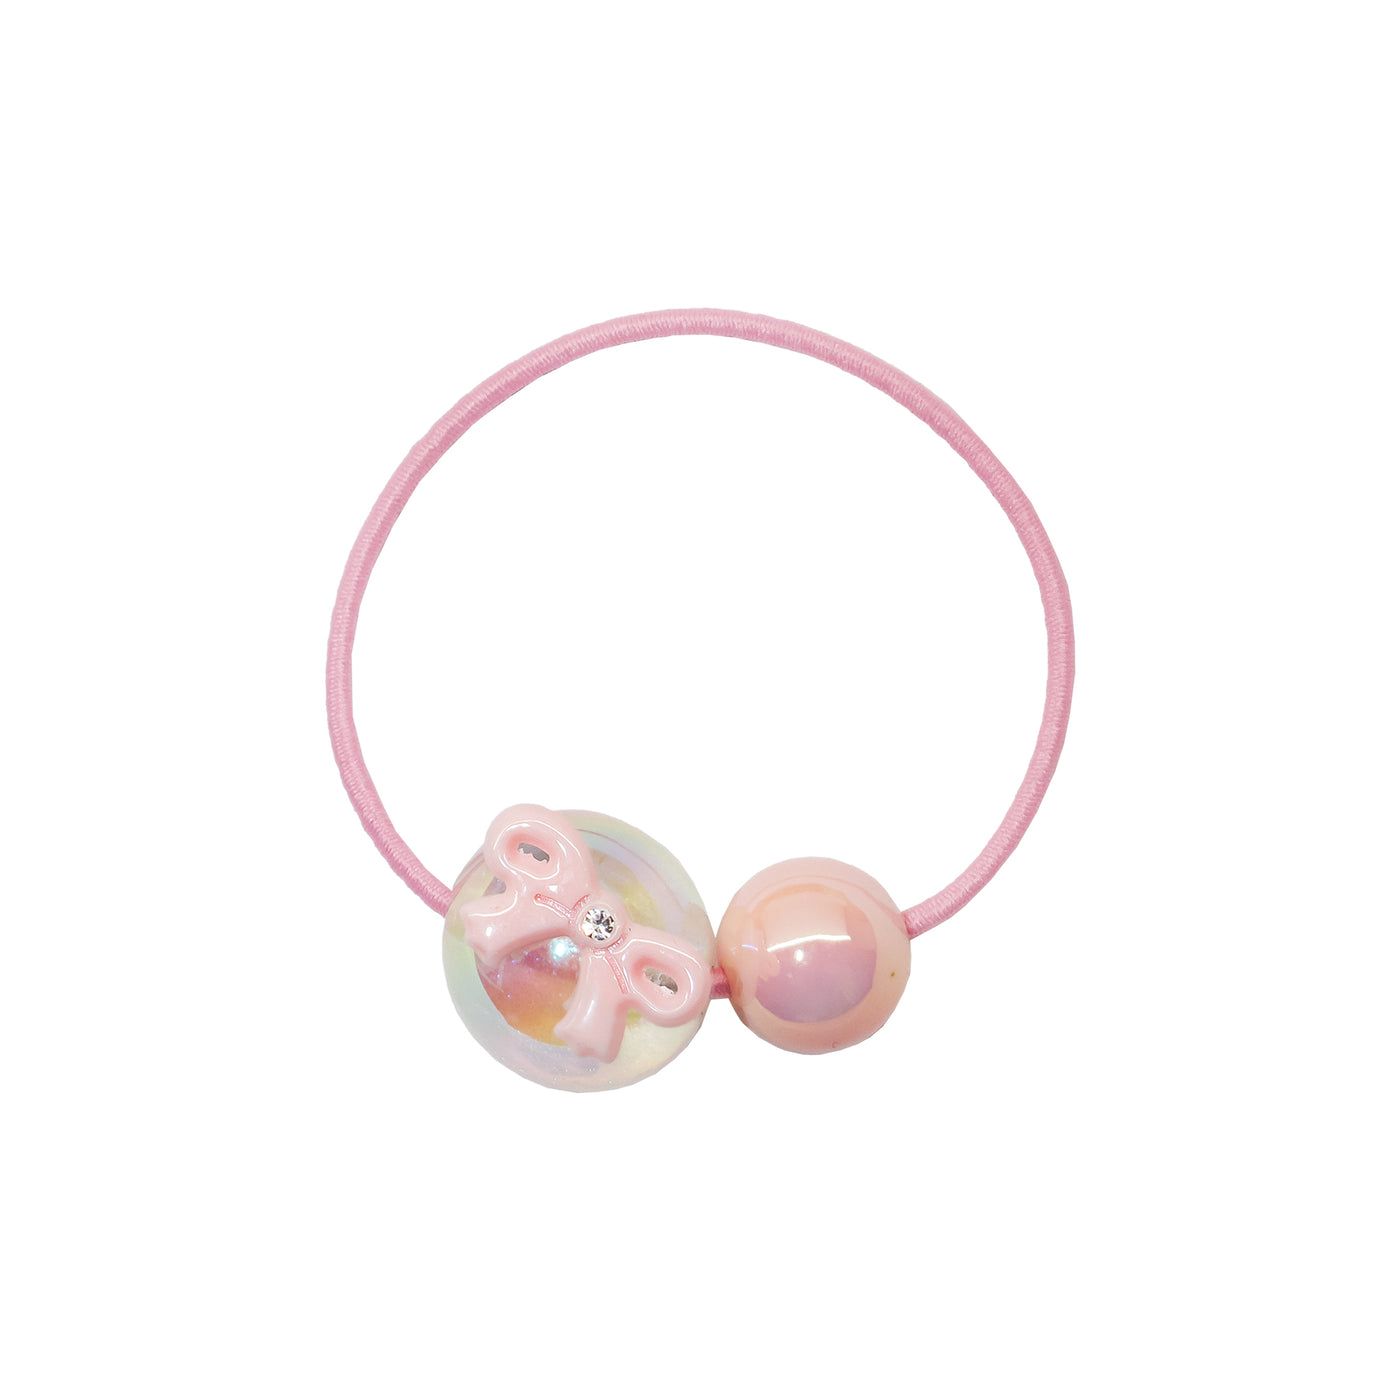 Bobble Hair Tie in Cotton Candy